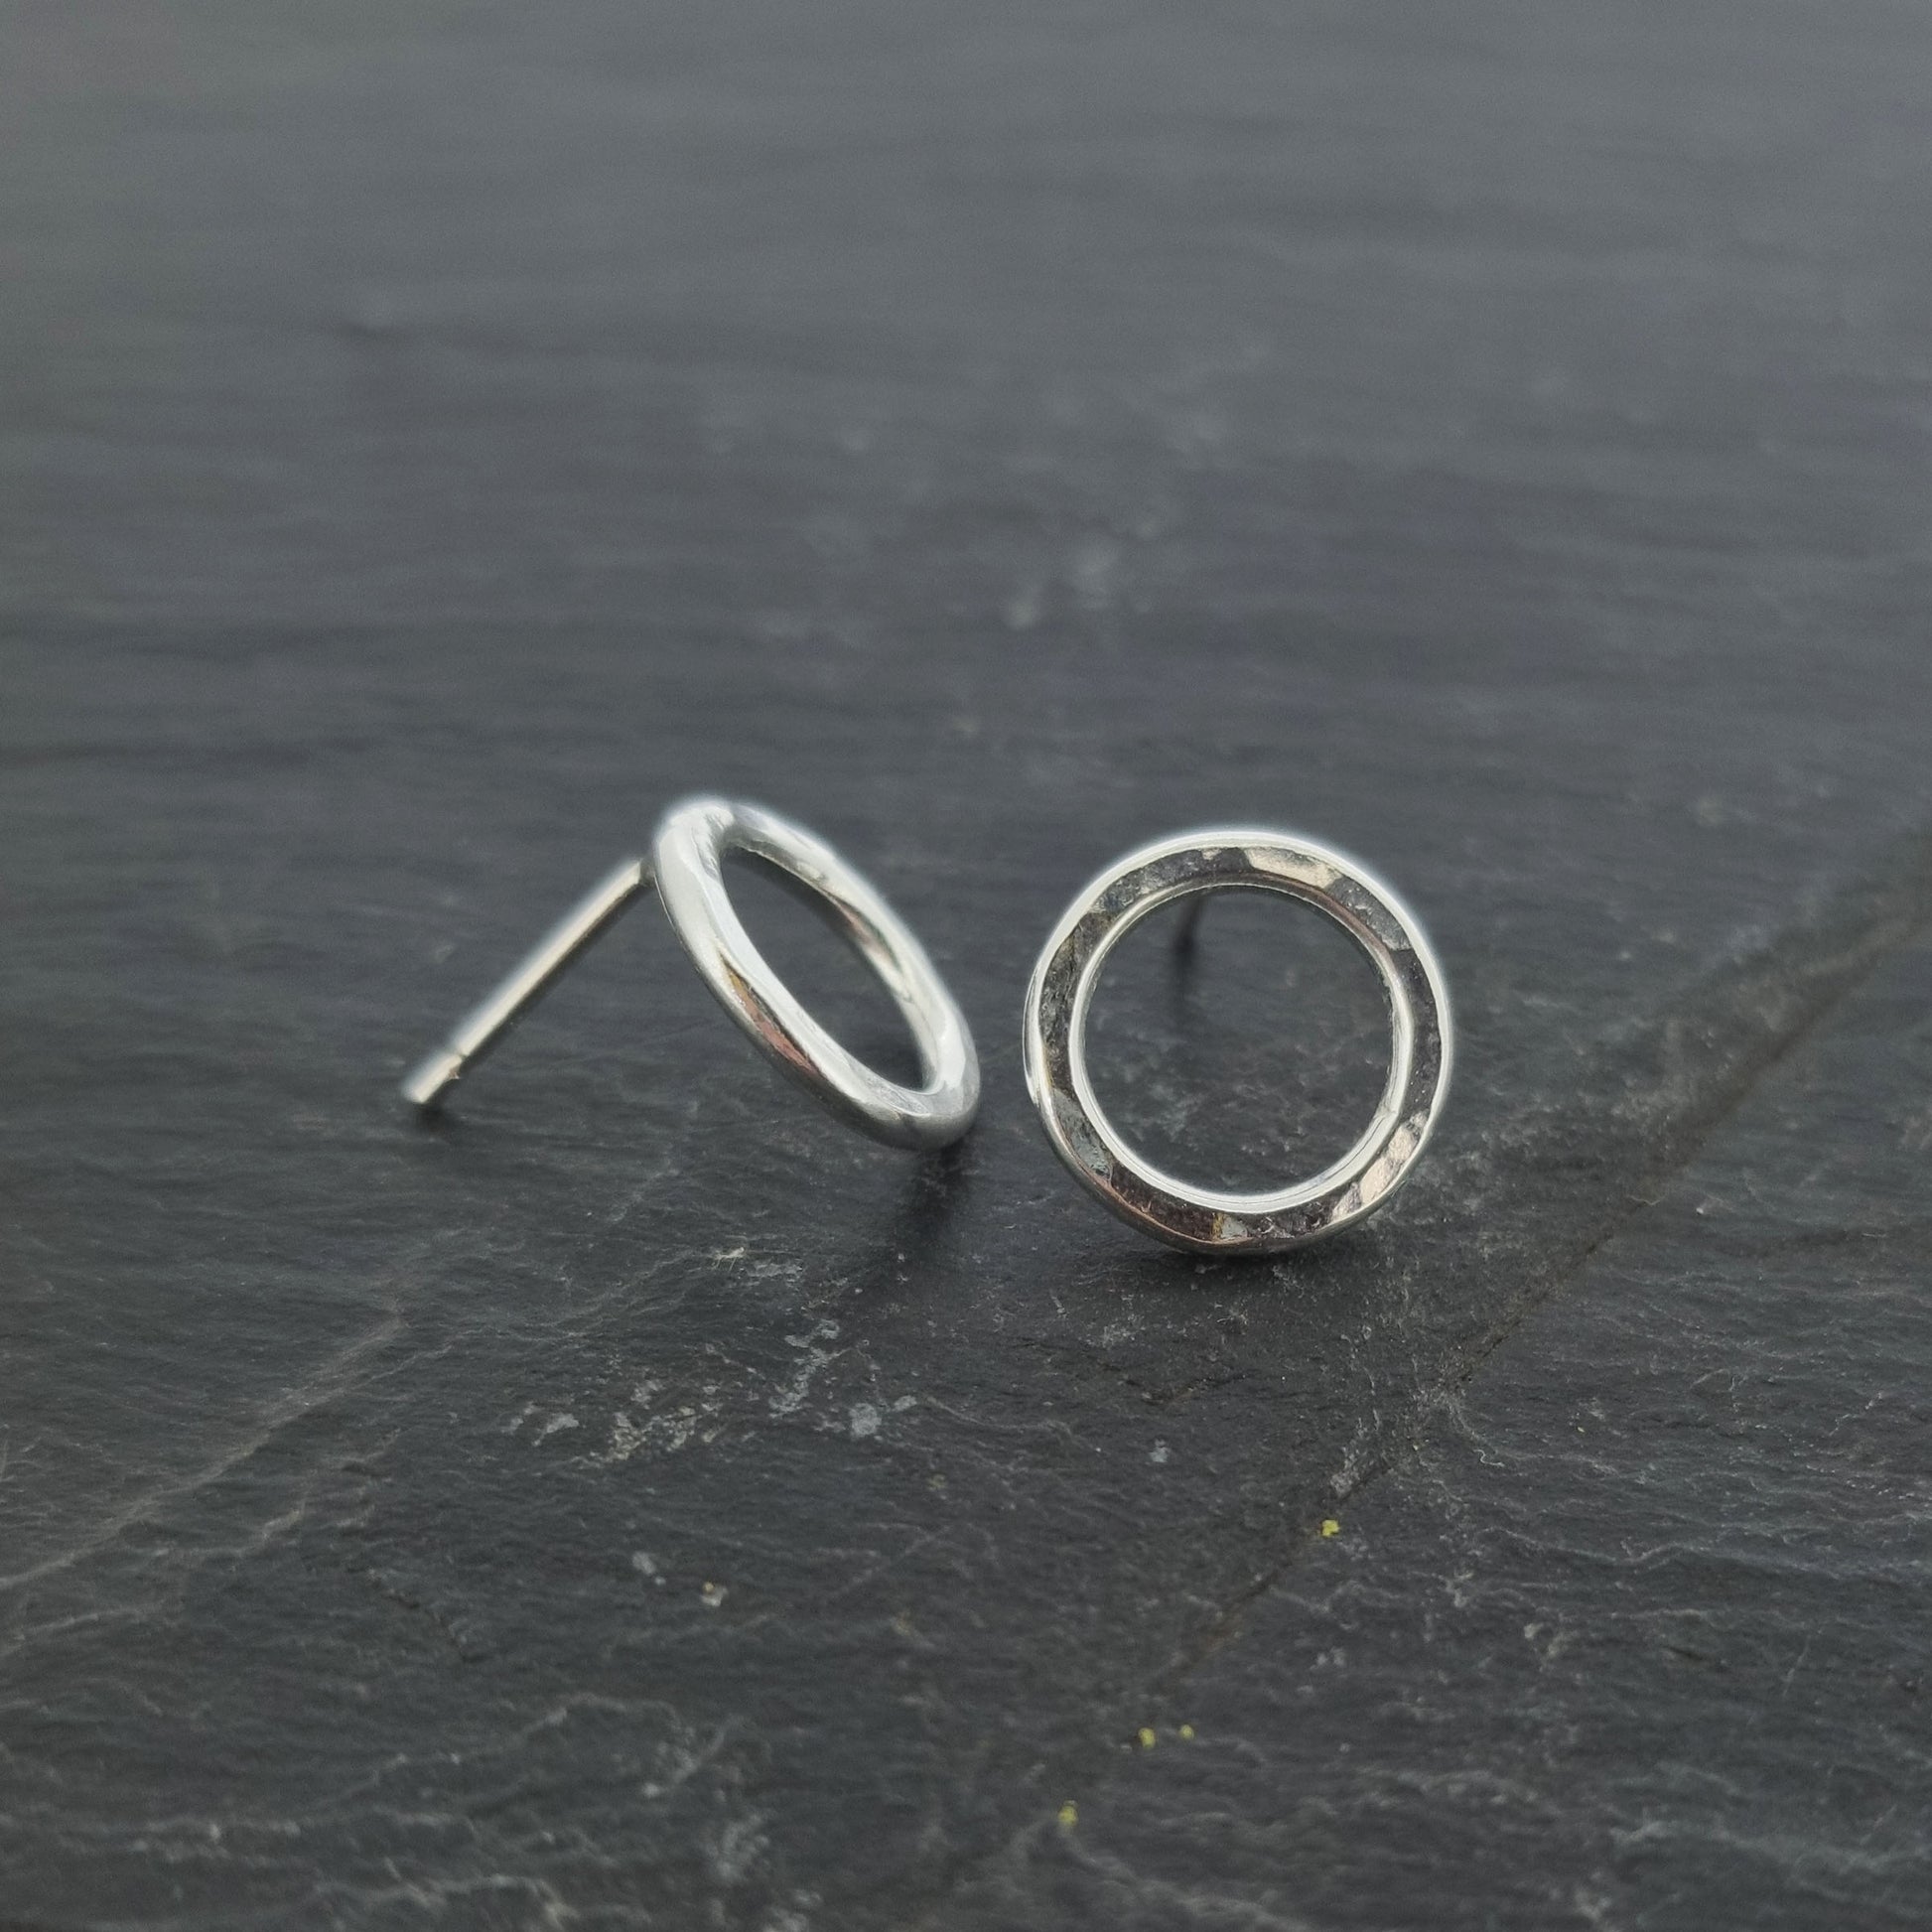 Silver open circle stud earrings with hammered texture.